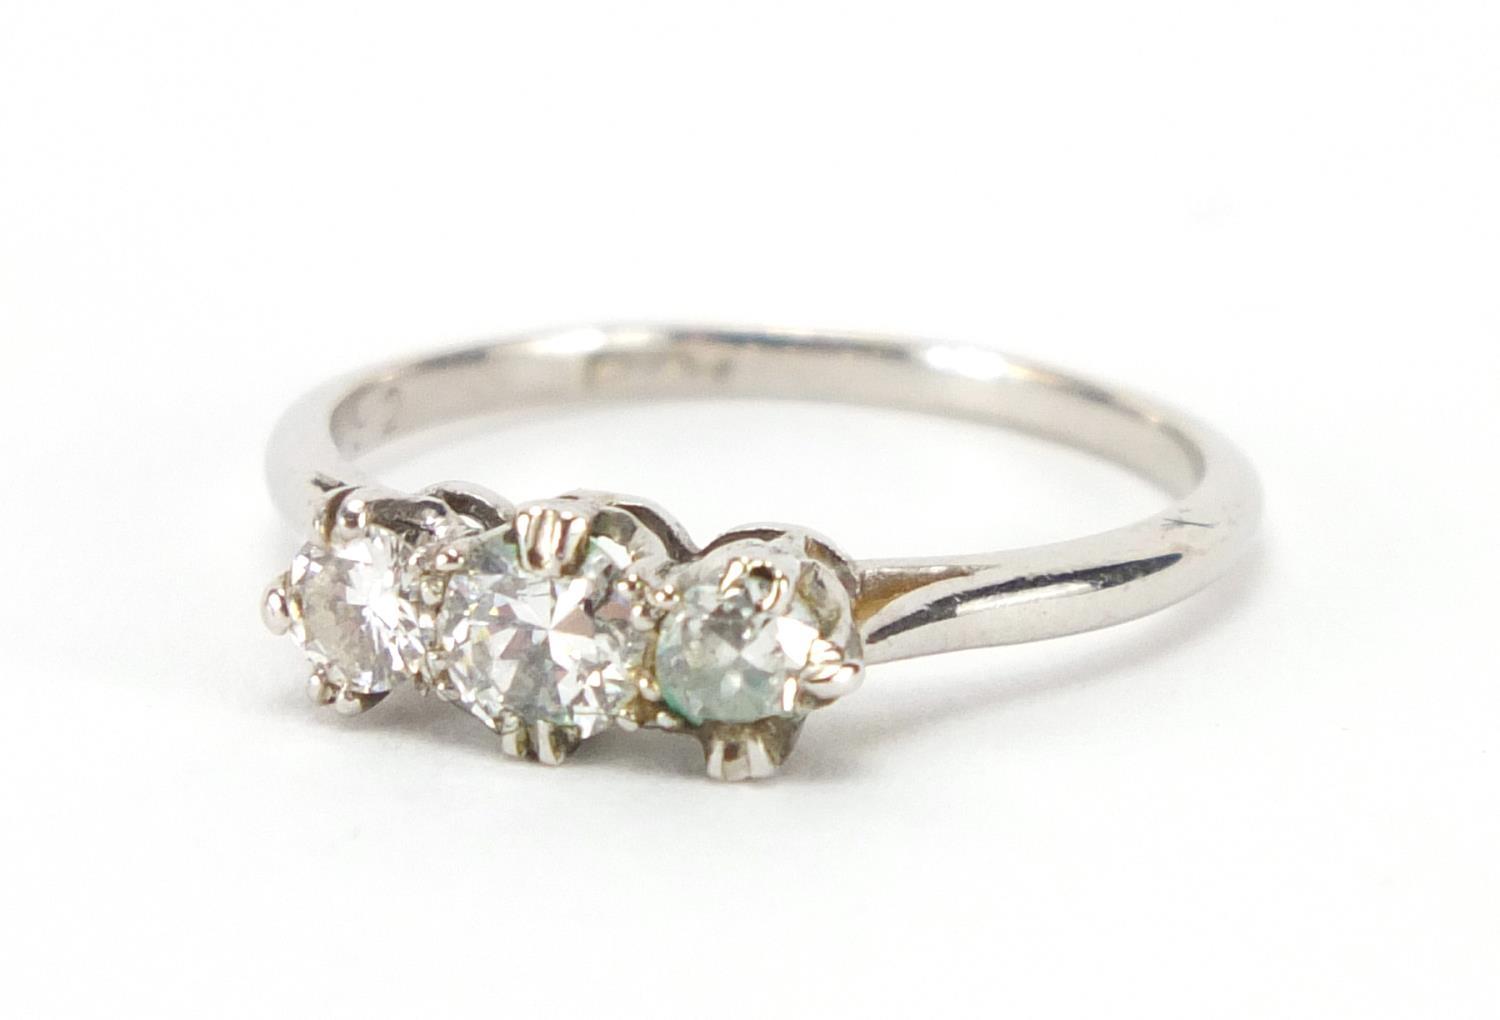 Platinum diamond three stone ring, size L, approximate weight 2.5g : For Extra Condition Reports